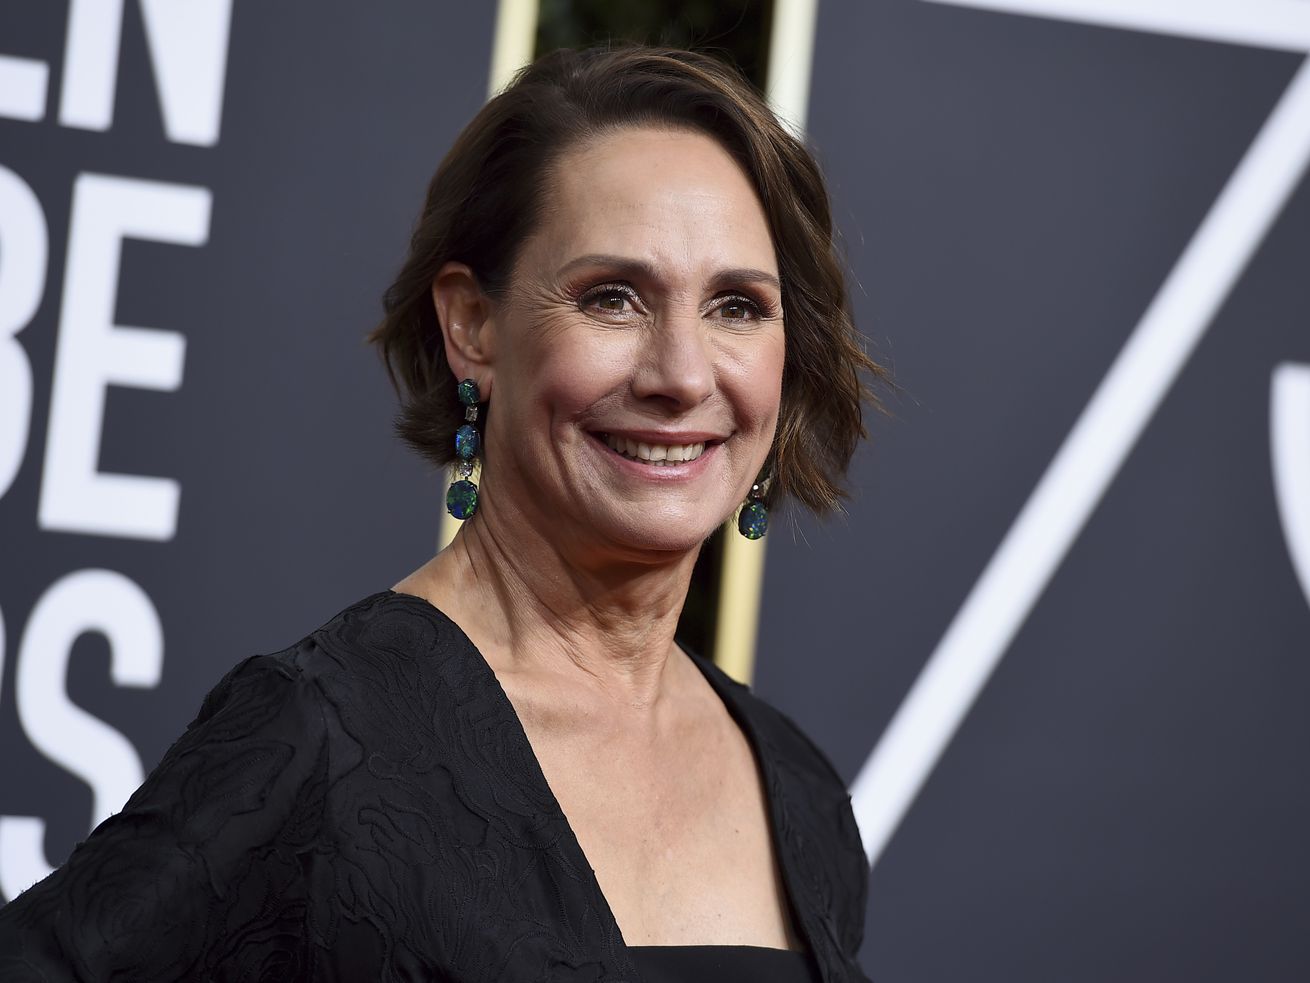 Actress Laurie Metcalf arrives at the 75th annual Golden Globe Awards in Beverly Hills, California, in 2018.